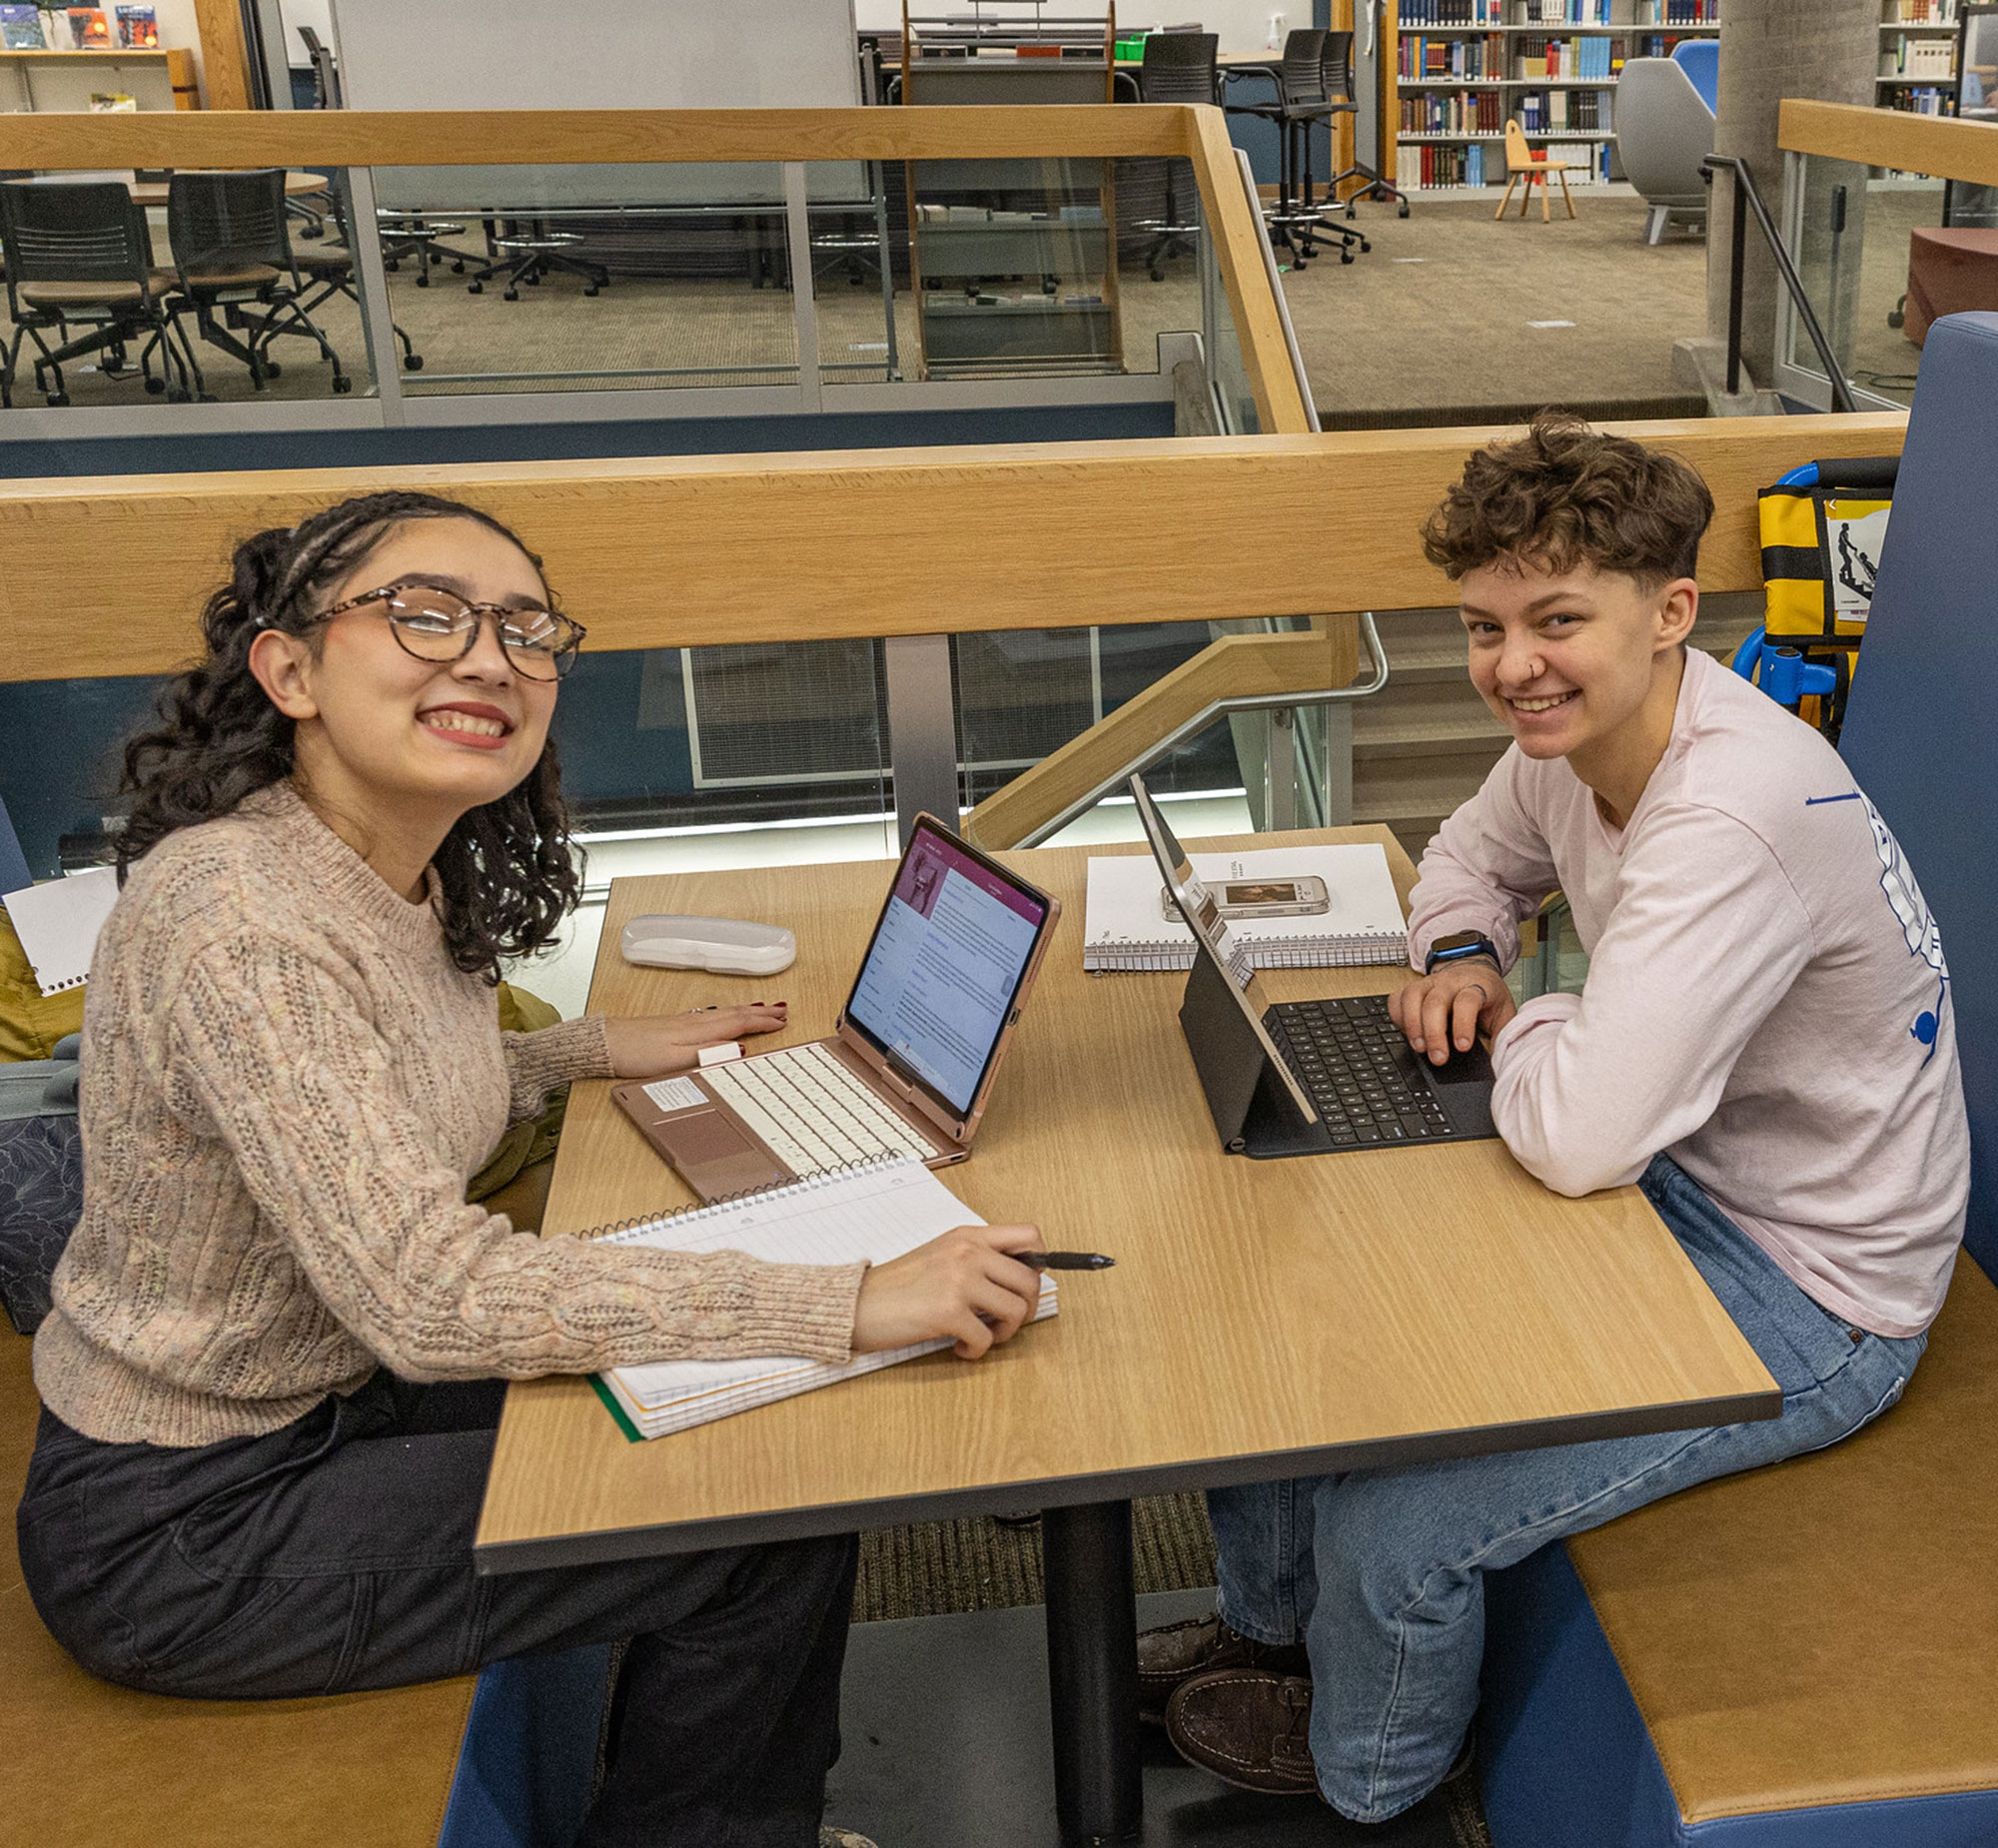 Students studying together at Sierra College Nevada County Campus